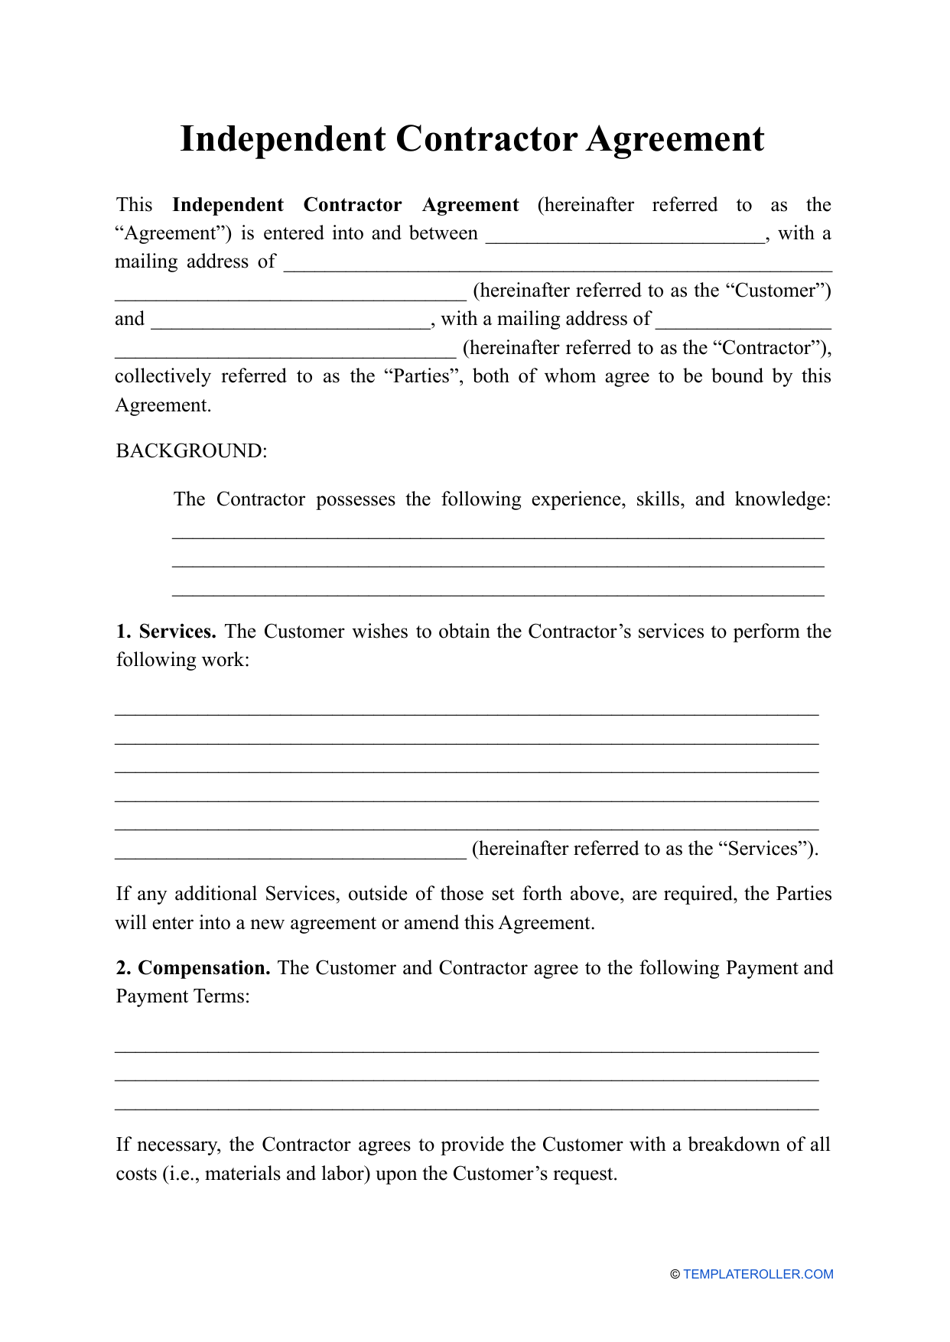 Independent Contractor Agreement Template, Page 1